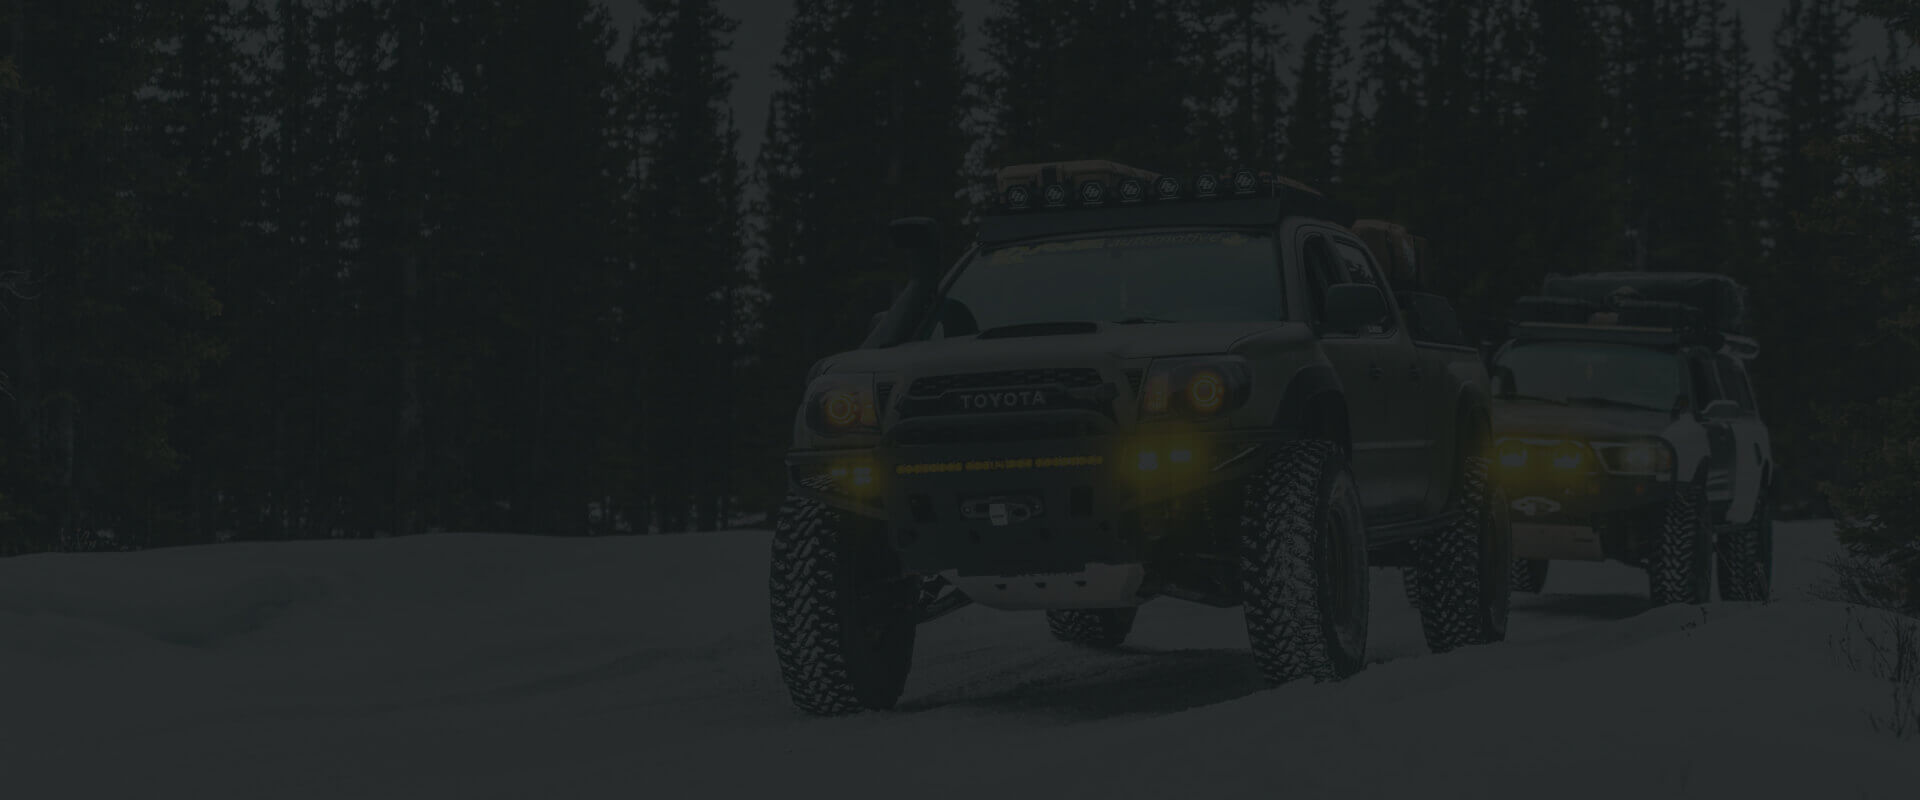 Built for taking the road less traveled